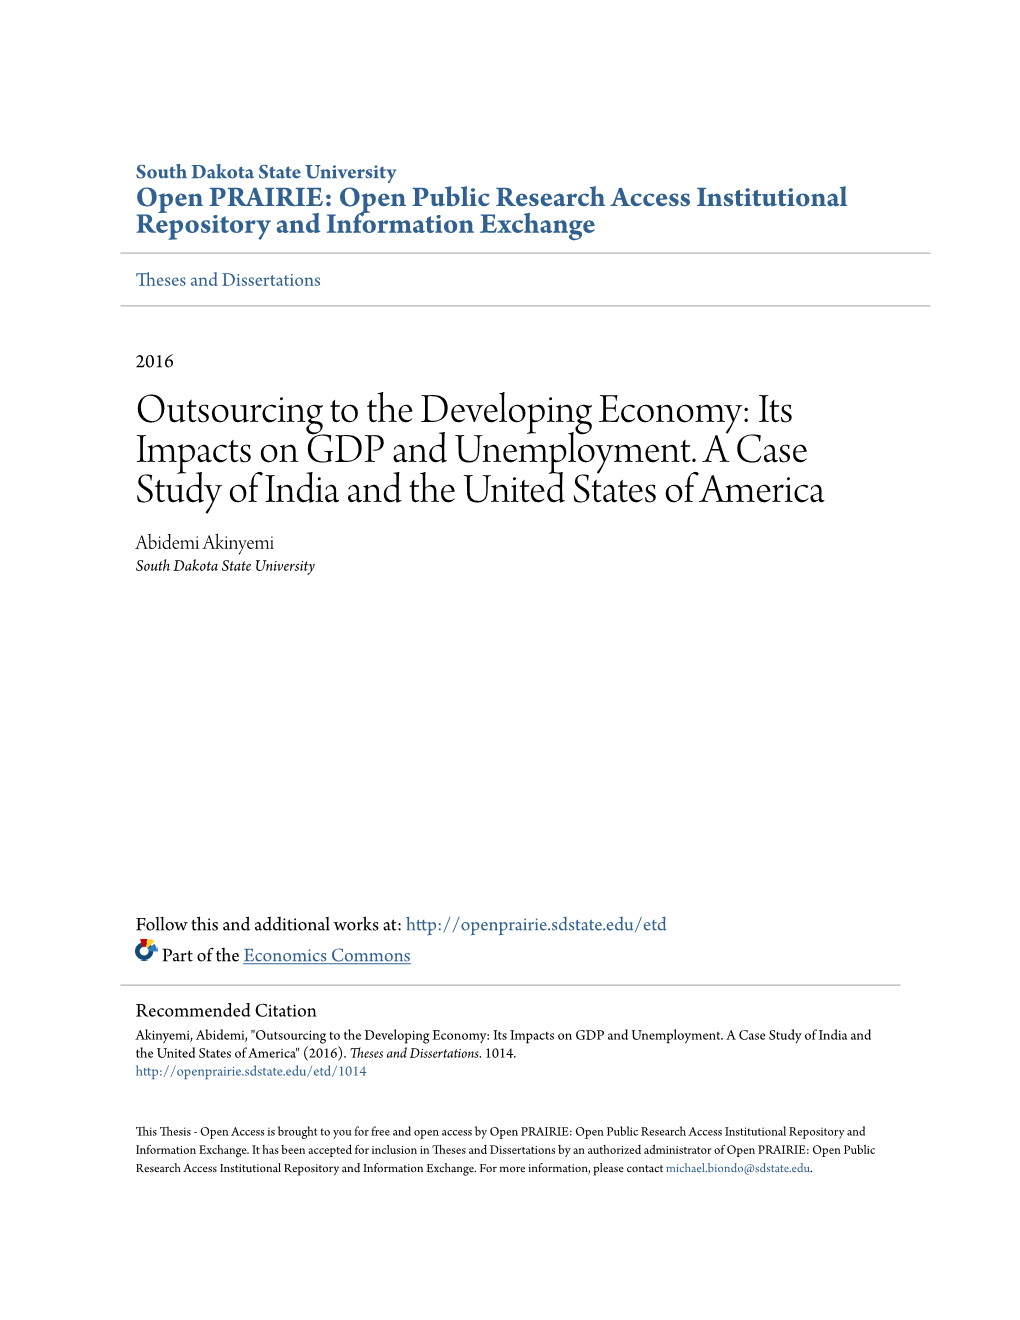 Outsourcing to the Developing Economy: Its Impacts on GDP and Unemployment. a Case Study of India and the United States of Ameri